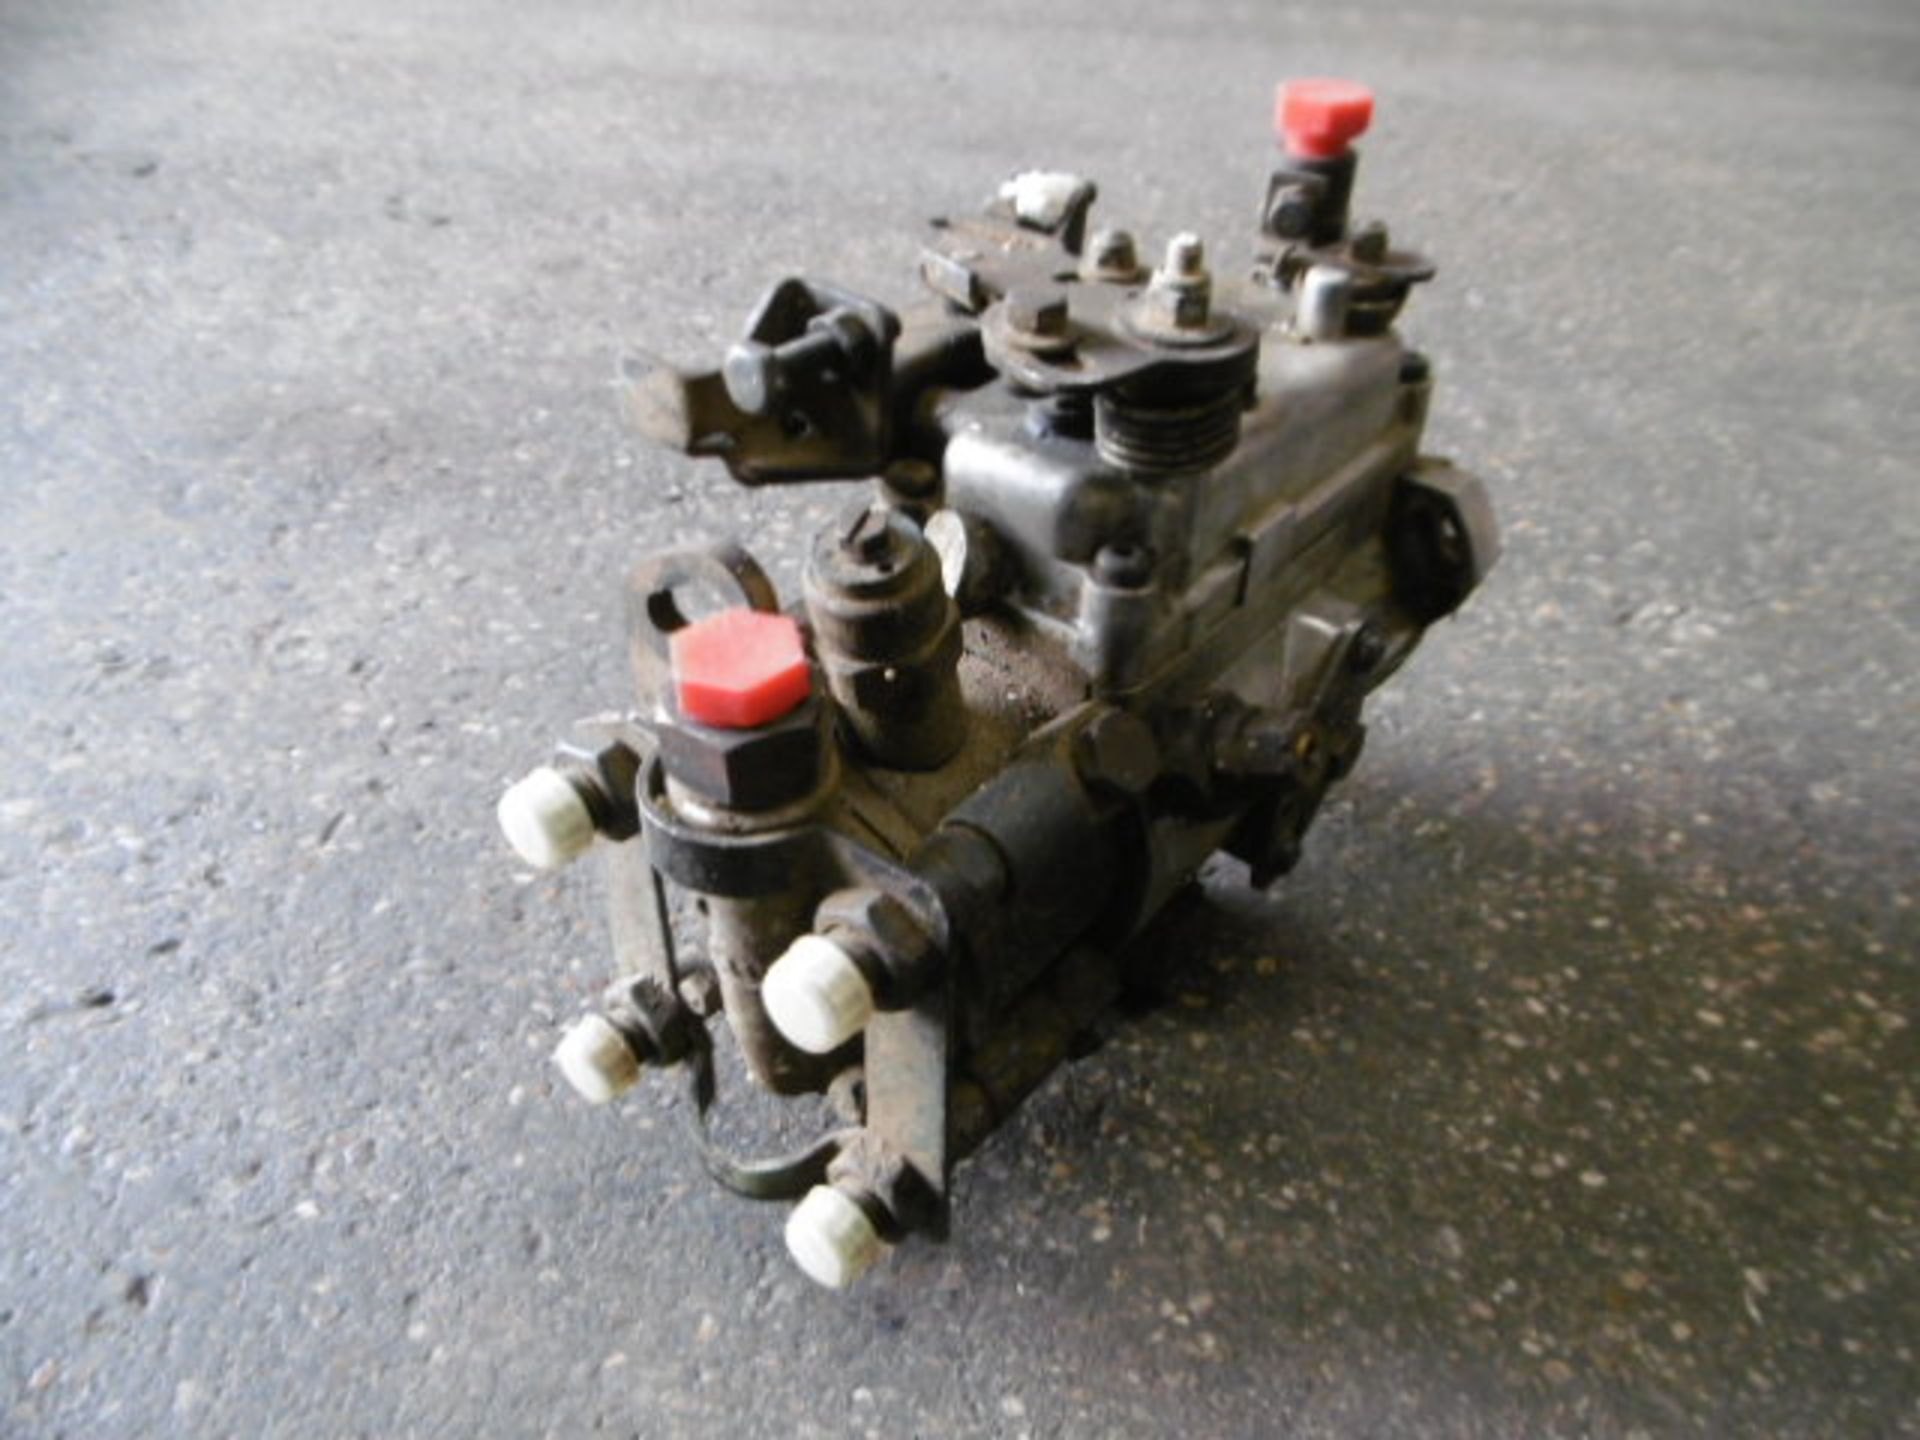 5 x Takeout Land Rover 2.5D Fuel Injector Pumps - Image 4 of 6